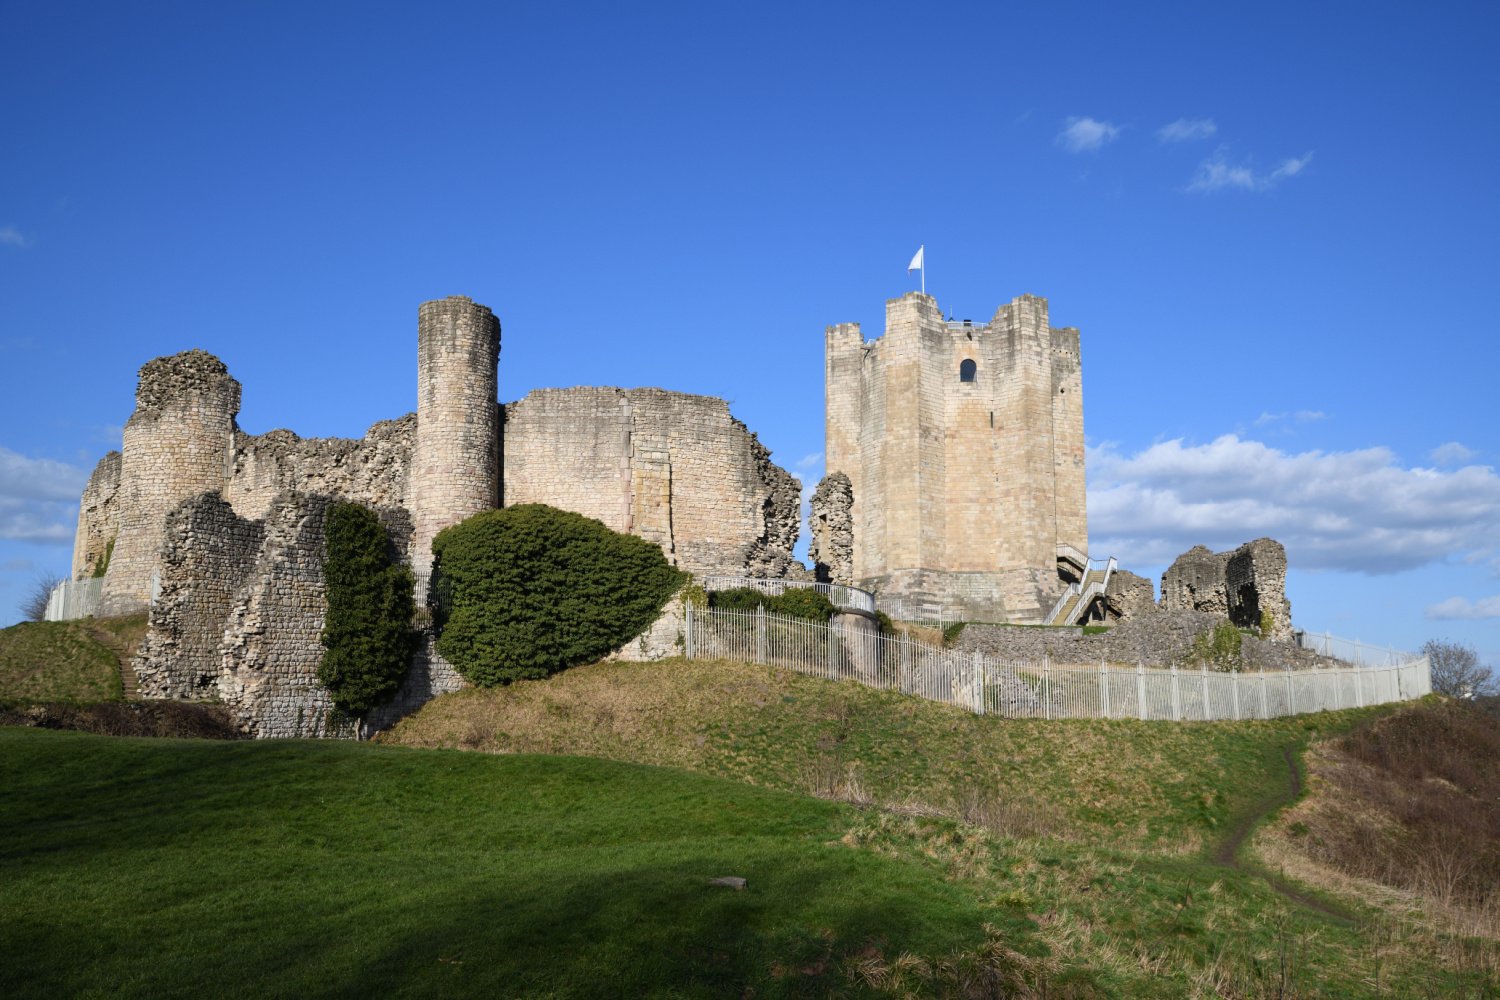 Image name conisbrough castle near doncaster south yorkshire the 10 image from the post A look at the history of Conisbrough Castle, with Dr Emma Wells in Yorkshire.com.